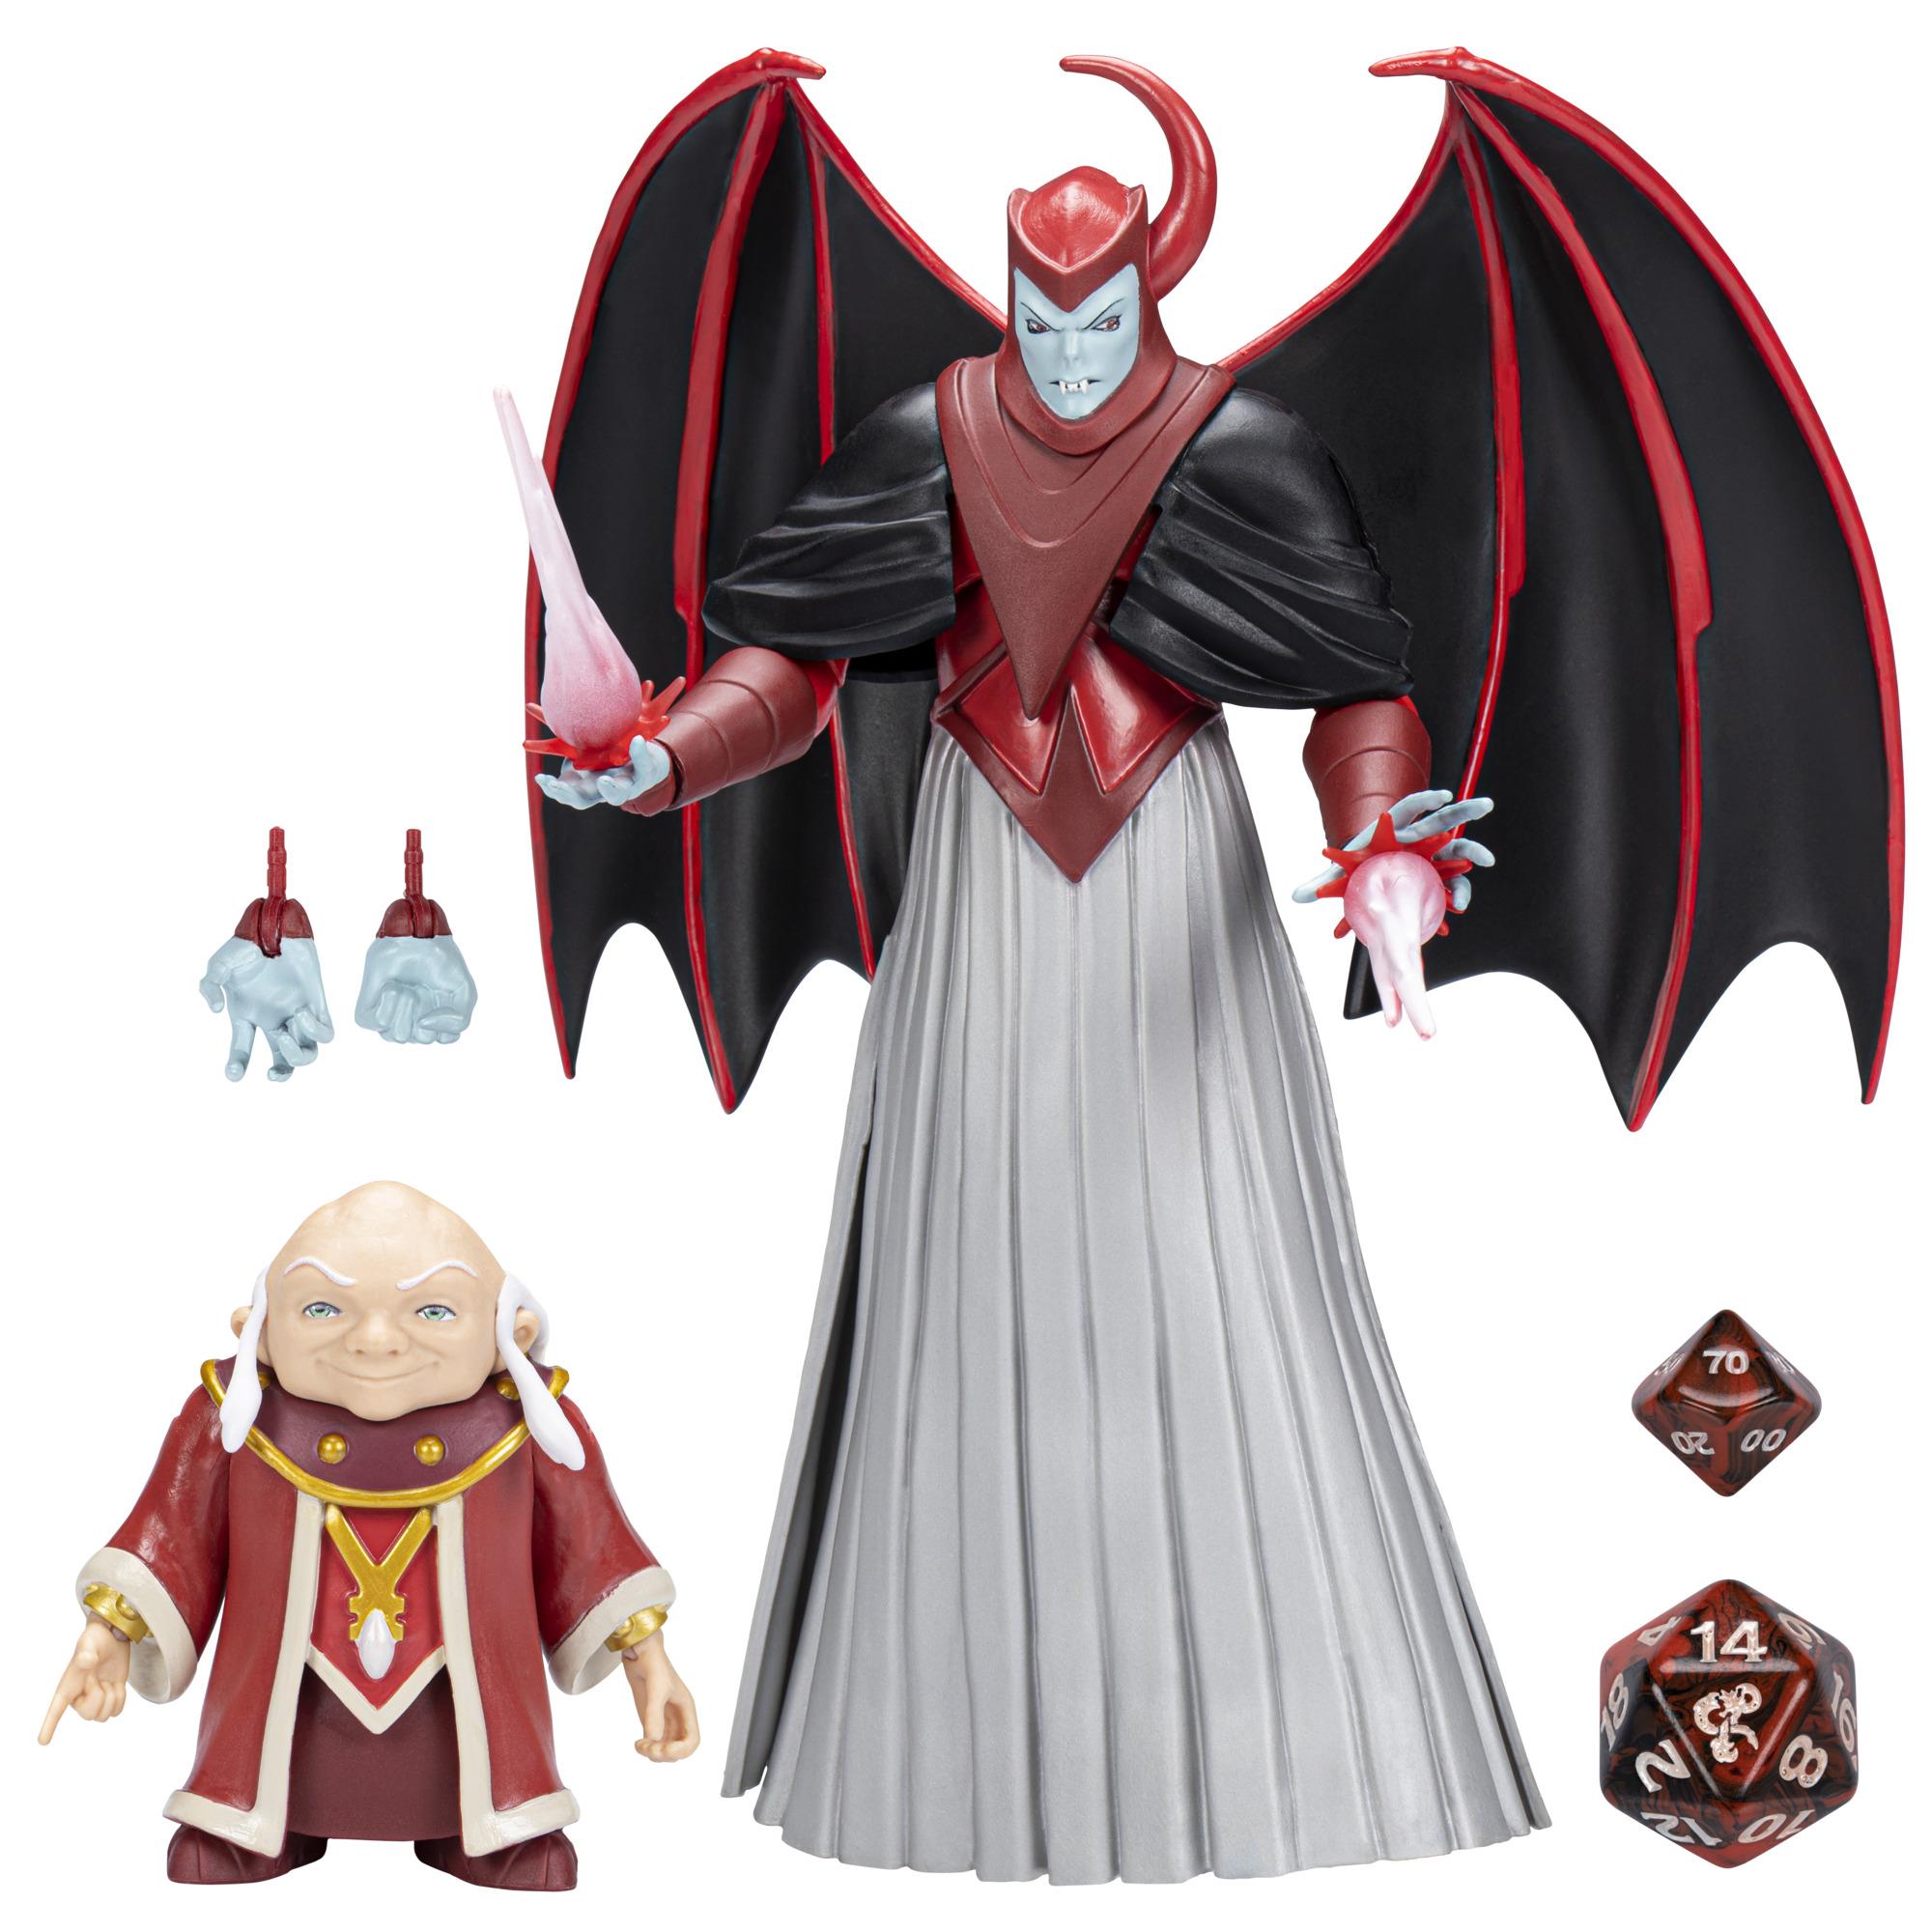 dungeons & dragons: cartoon classics - scale dungeon master & venger figure